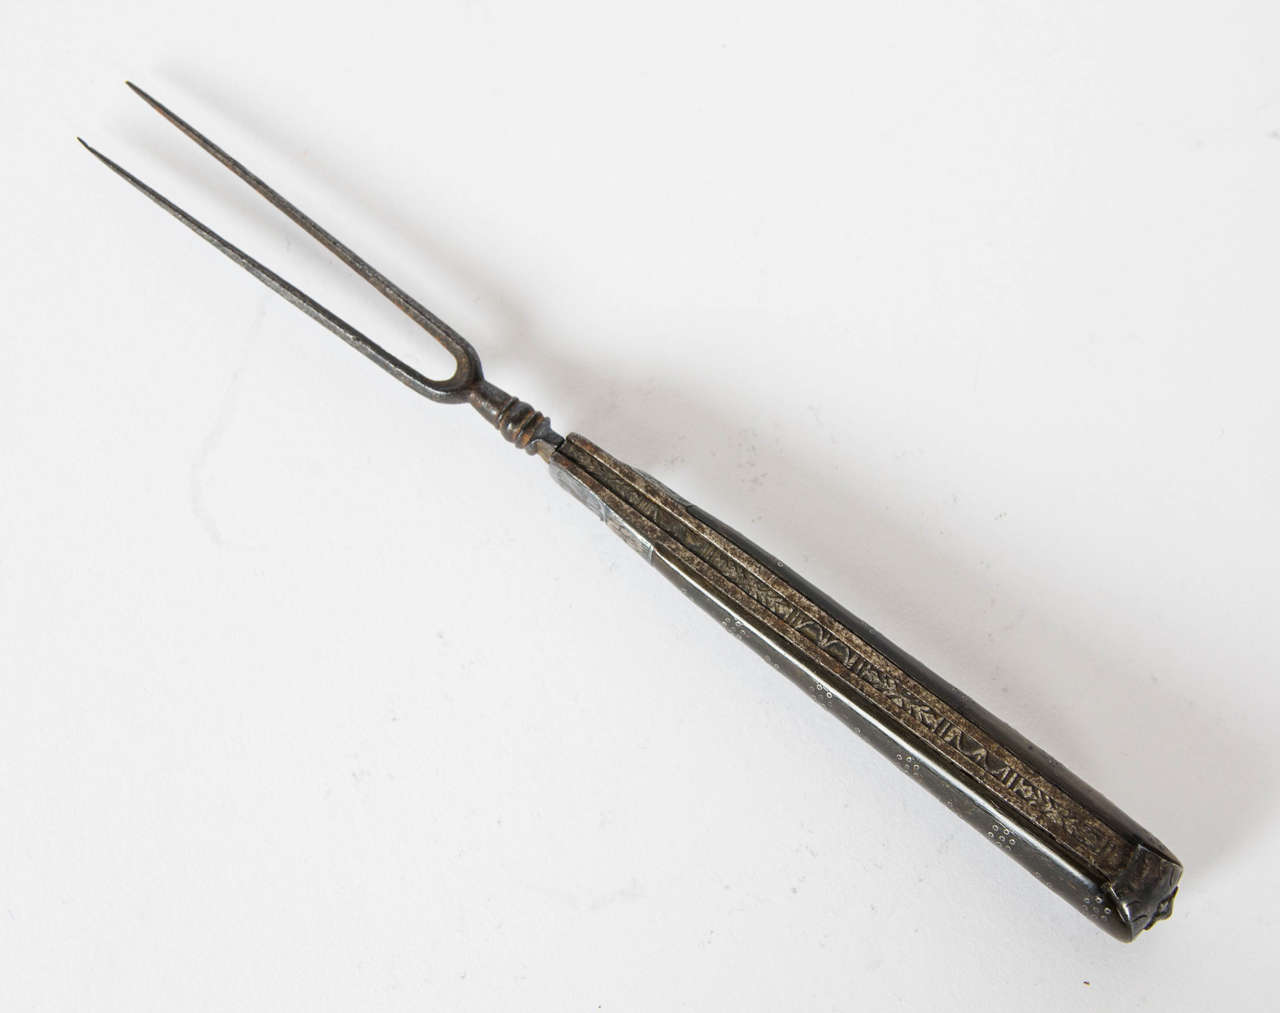 A very rare English Carolean period (1660-1685) folding two pronged Campaign fork. The tines are steel and the handle is made from cow Horn with applied silver floral motifs and pique work. There is a very detailed scroll motif along the steel spine